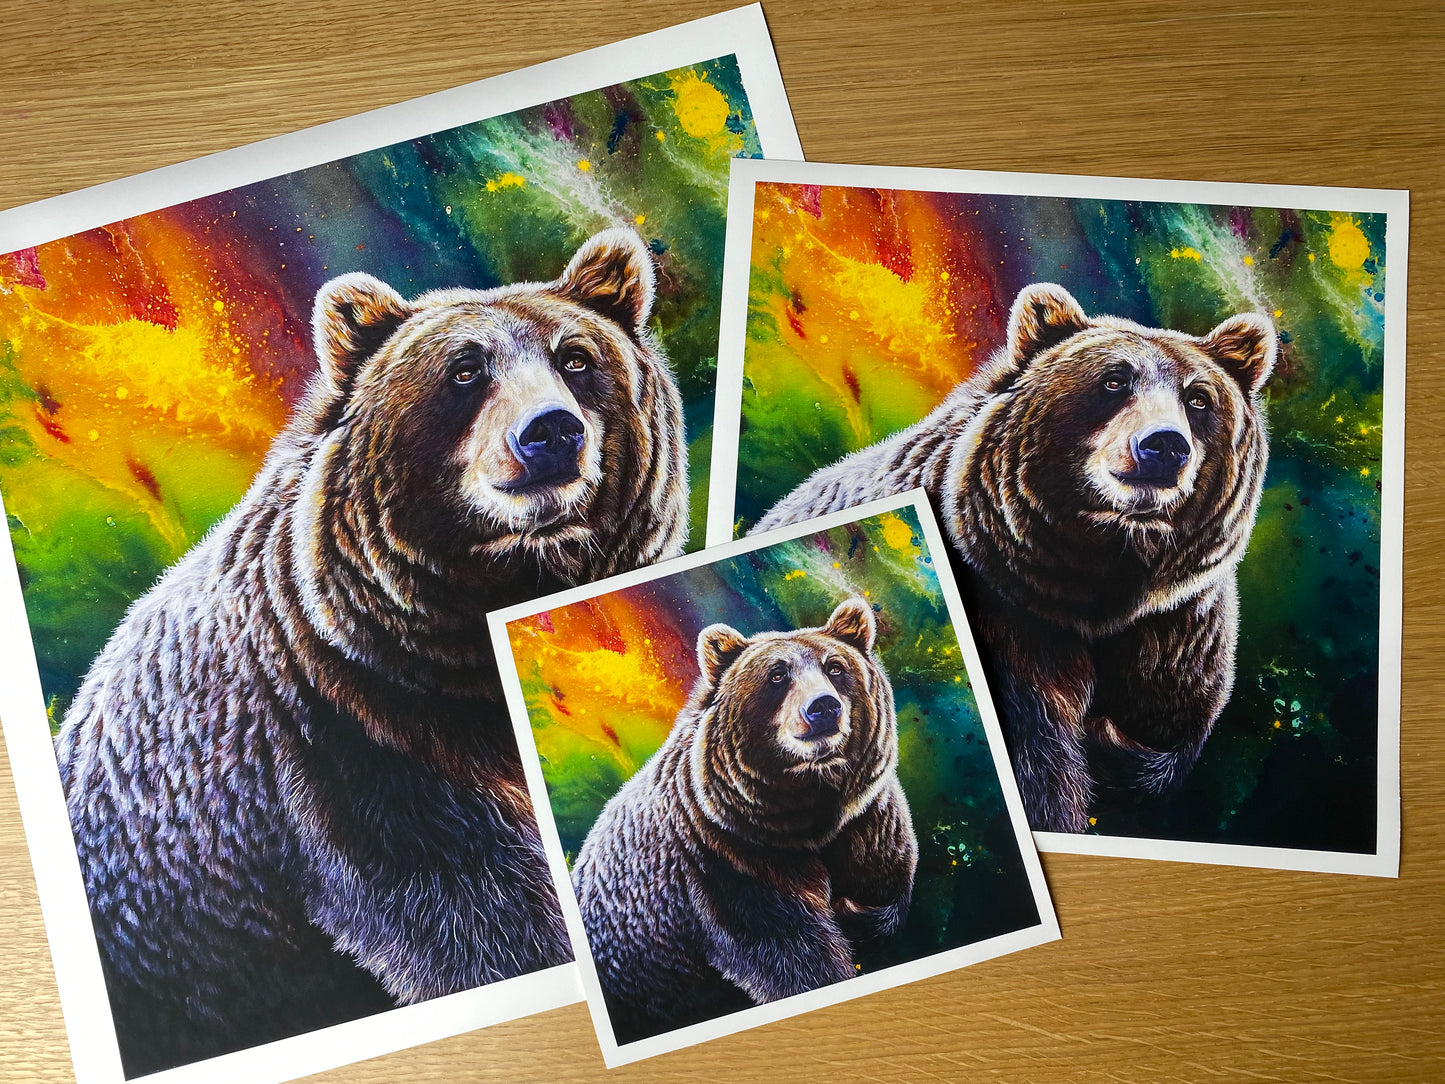 "You are special 2" "Galaxy Bear" Giclee Fine Art Print